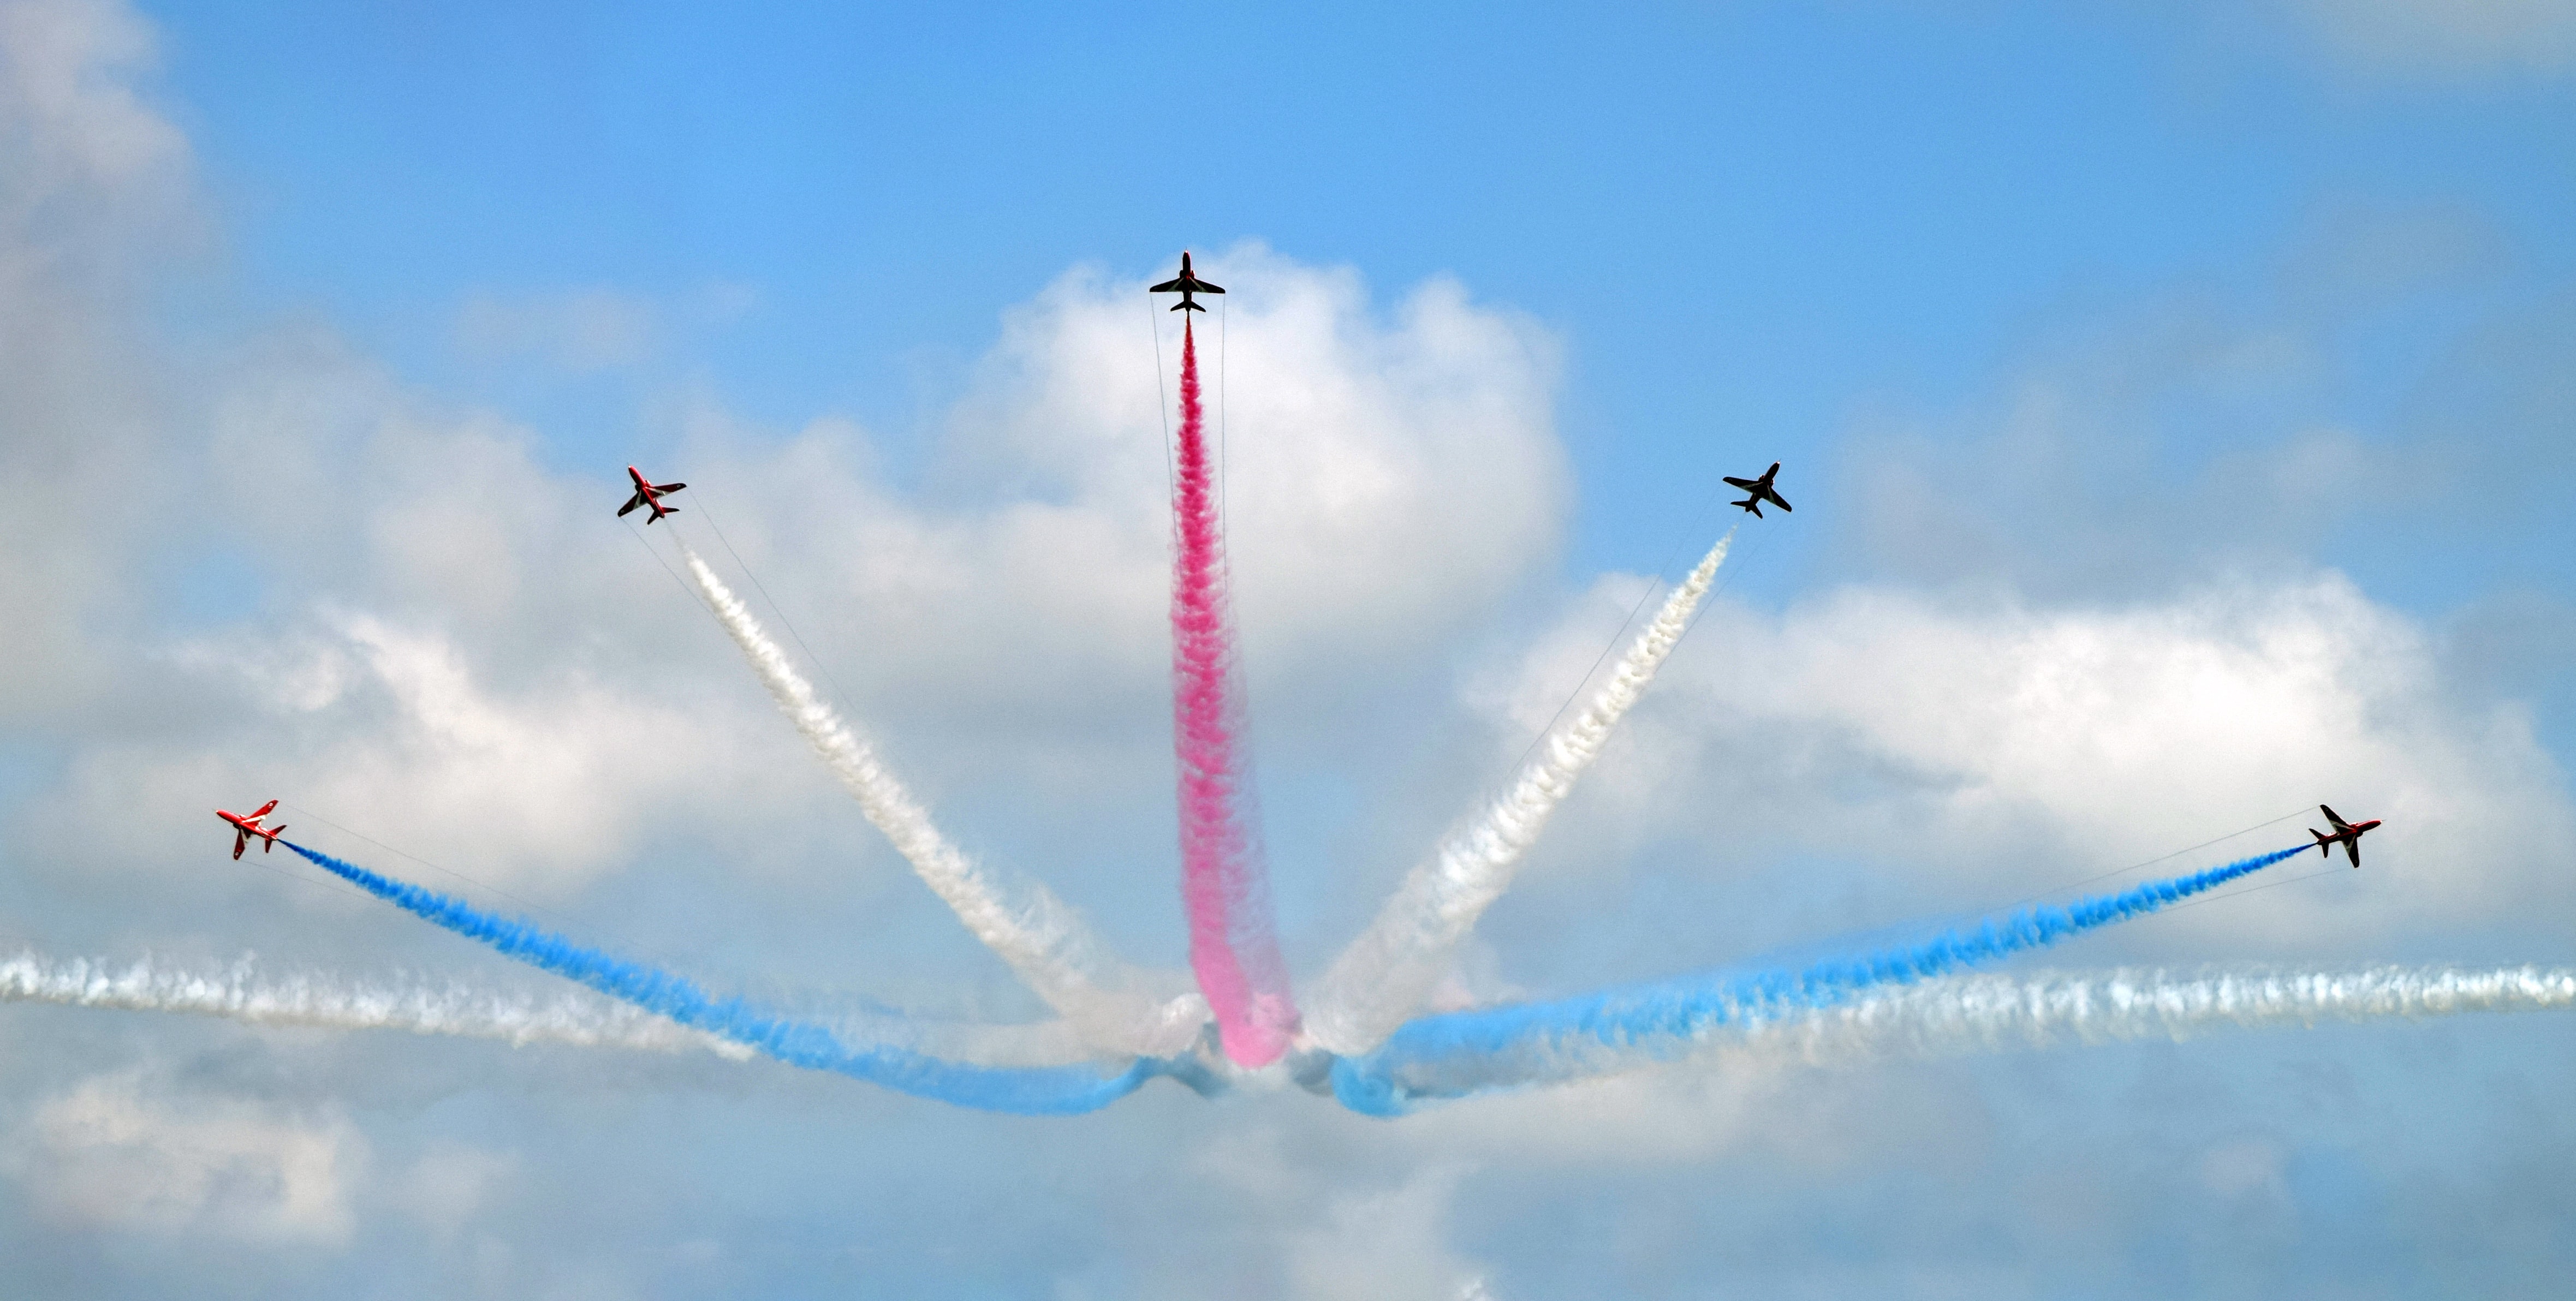 Jets creating concentric smoke trails in red, white, and blue; image by Owen Kemp, via Unsplash.com.